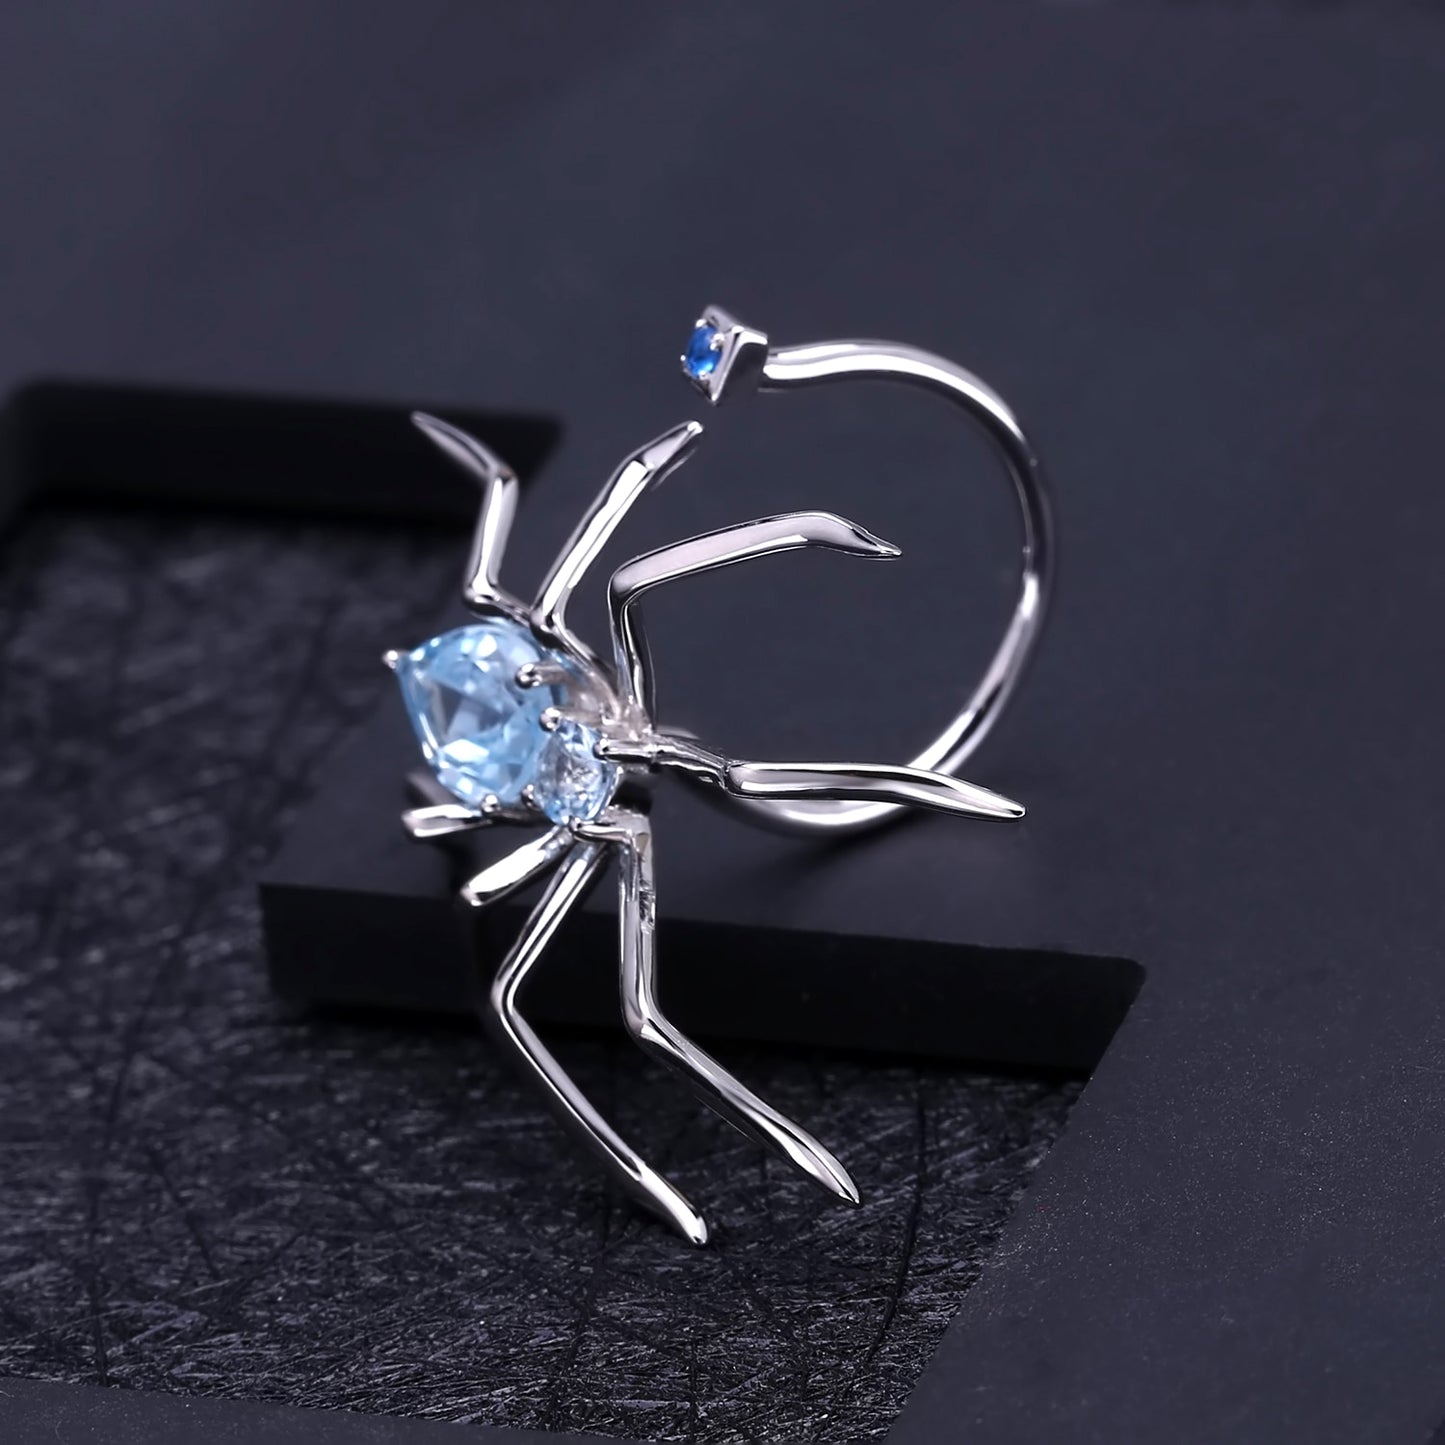 Spider Ring in 925 Silver and Topaz